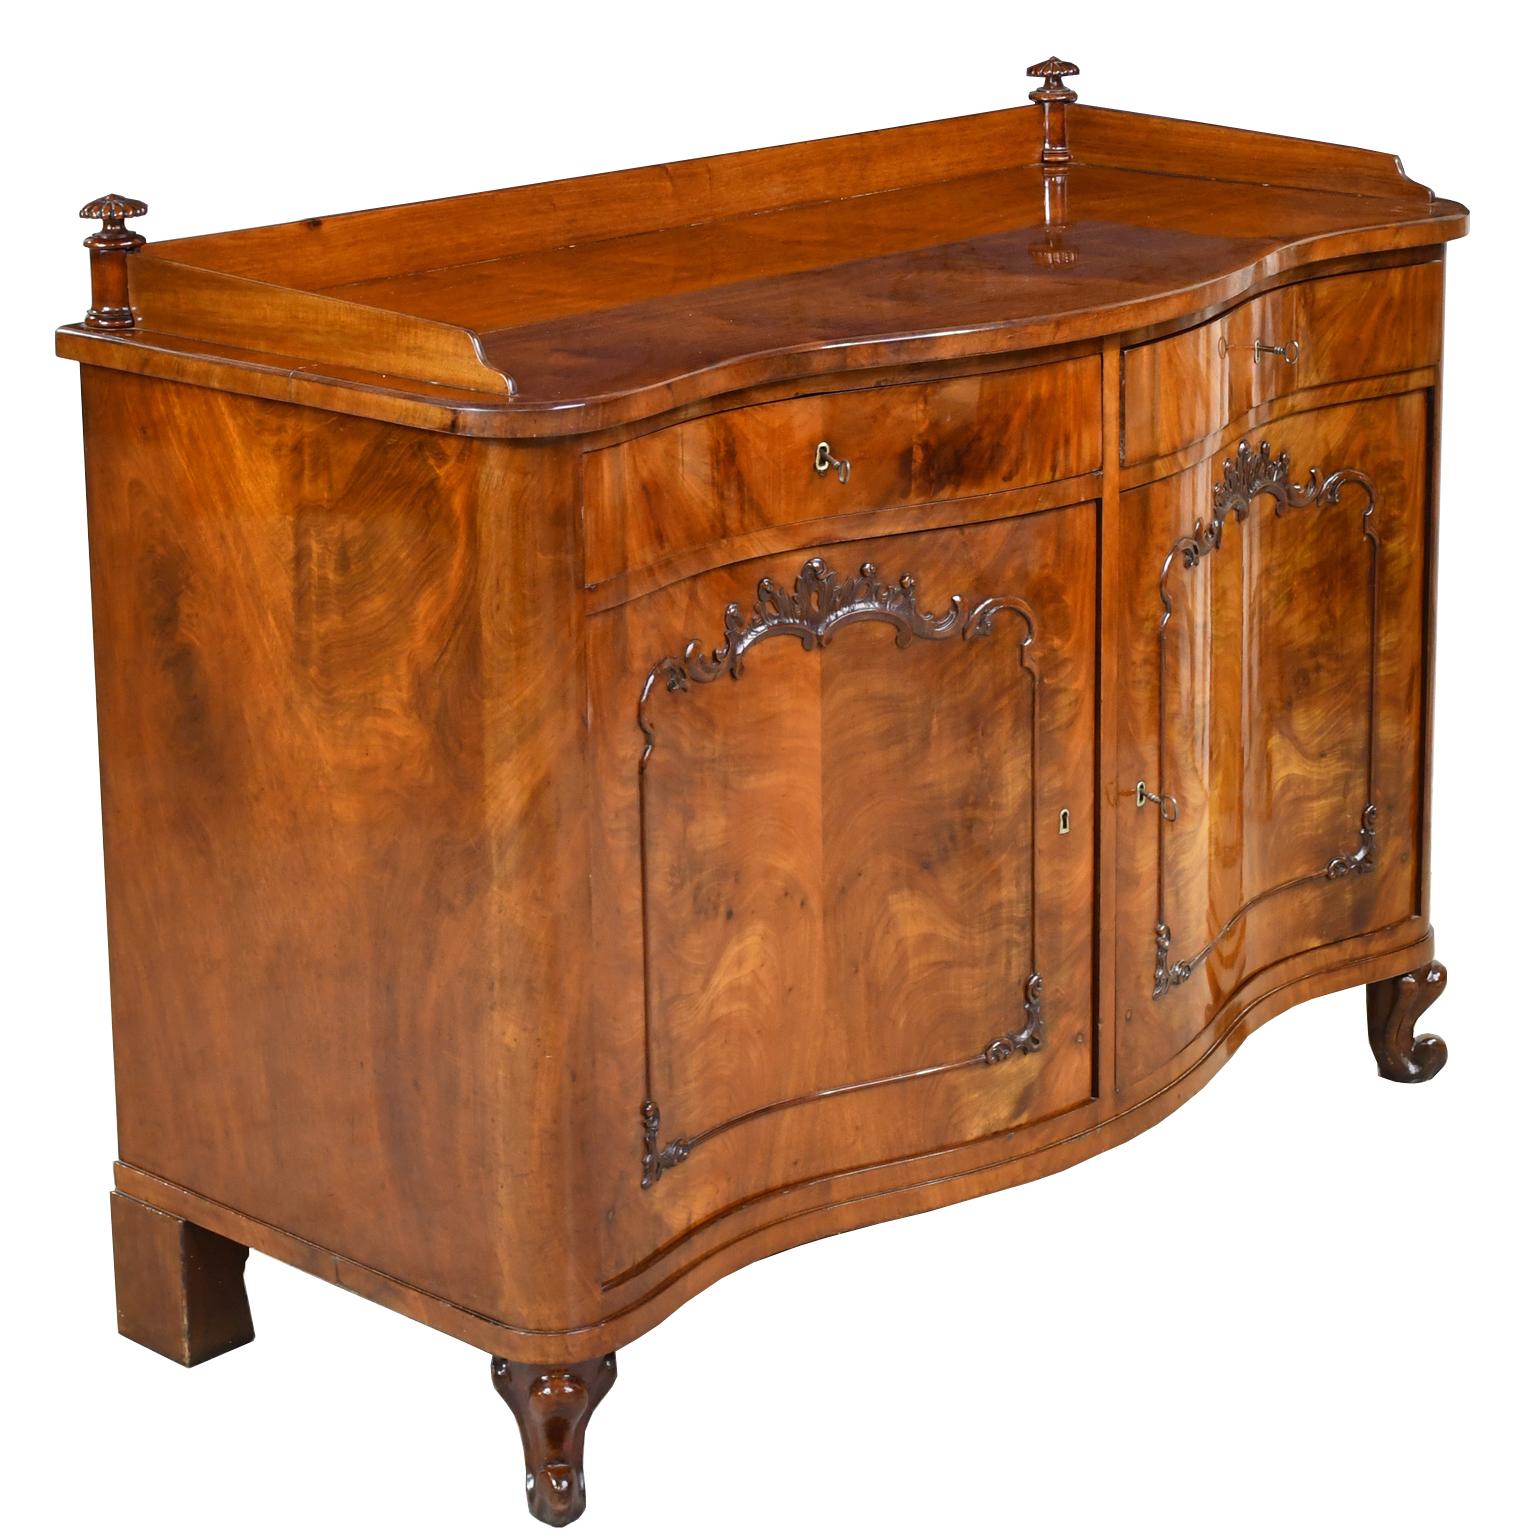 Christian VIII Serpentine-Front Sideboard in West Indies Mahogany, circa 1850 For Sale 1